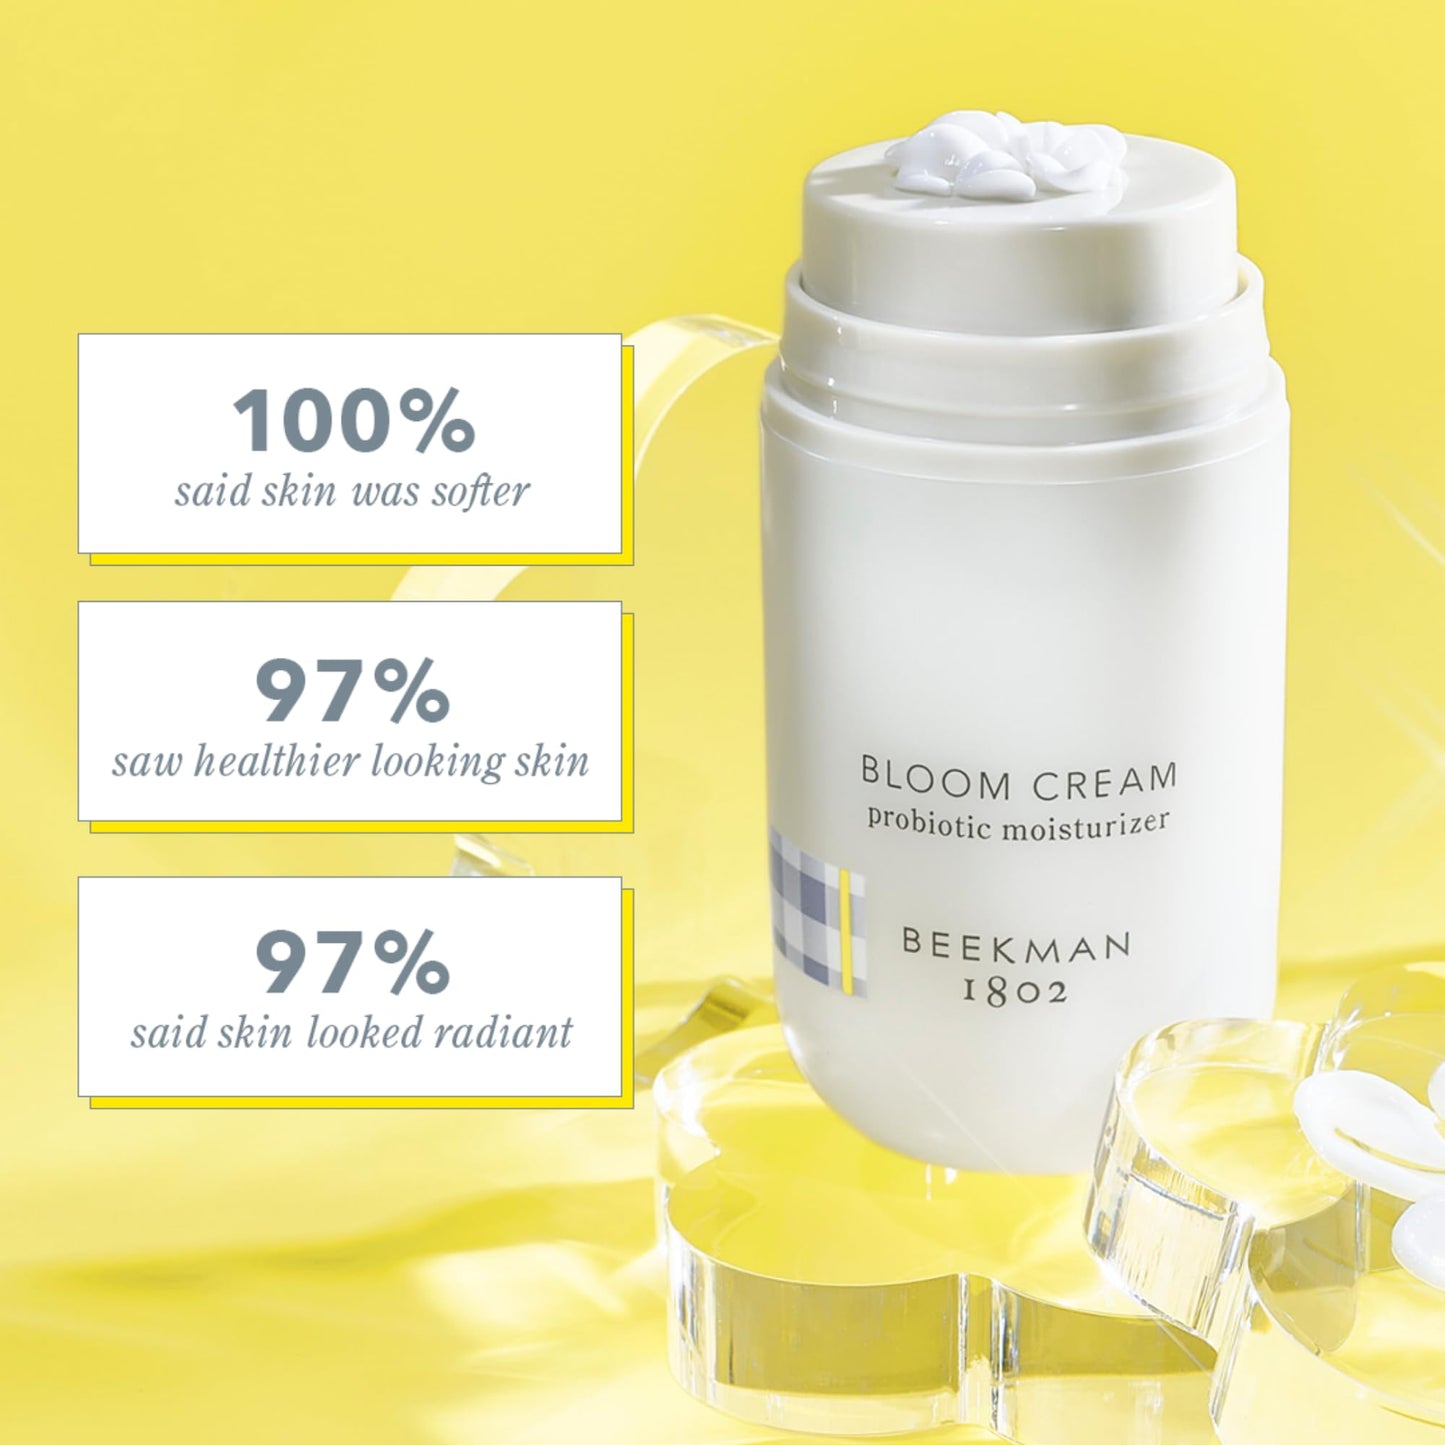 Beekman 1802 Bloom Cream Daily Face Moisturizer - Fragrance Free - 50 mL - Nourishes, Hydrates & Restores with Goat Milk - Microbiome Friendly - Good for Sensitive Skin - Cruelty Free